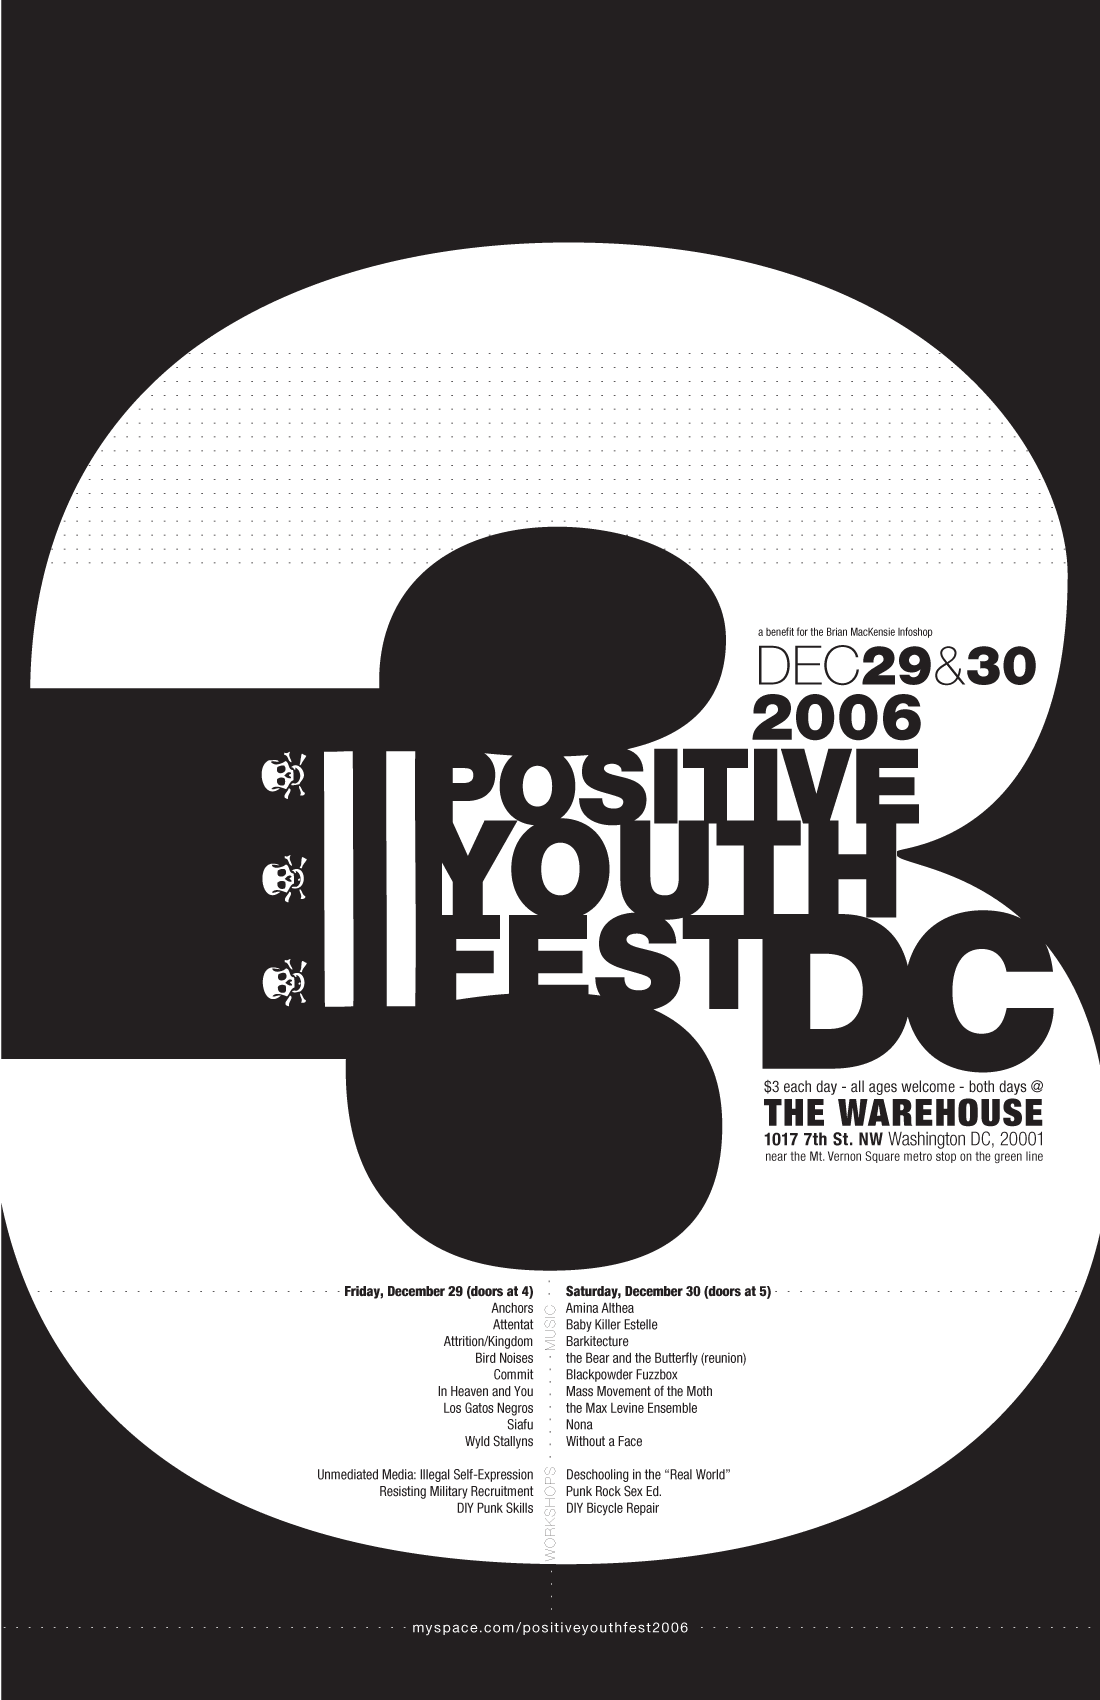 Positive Youth Fest 3 Poster